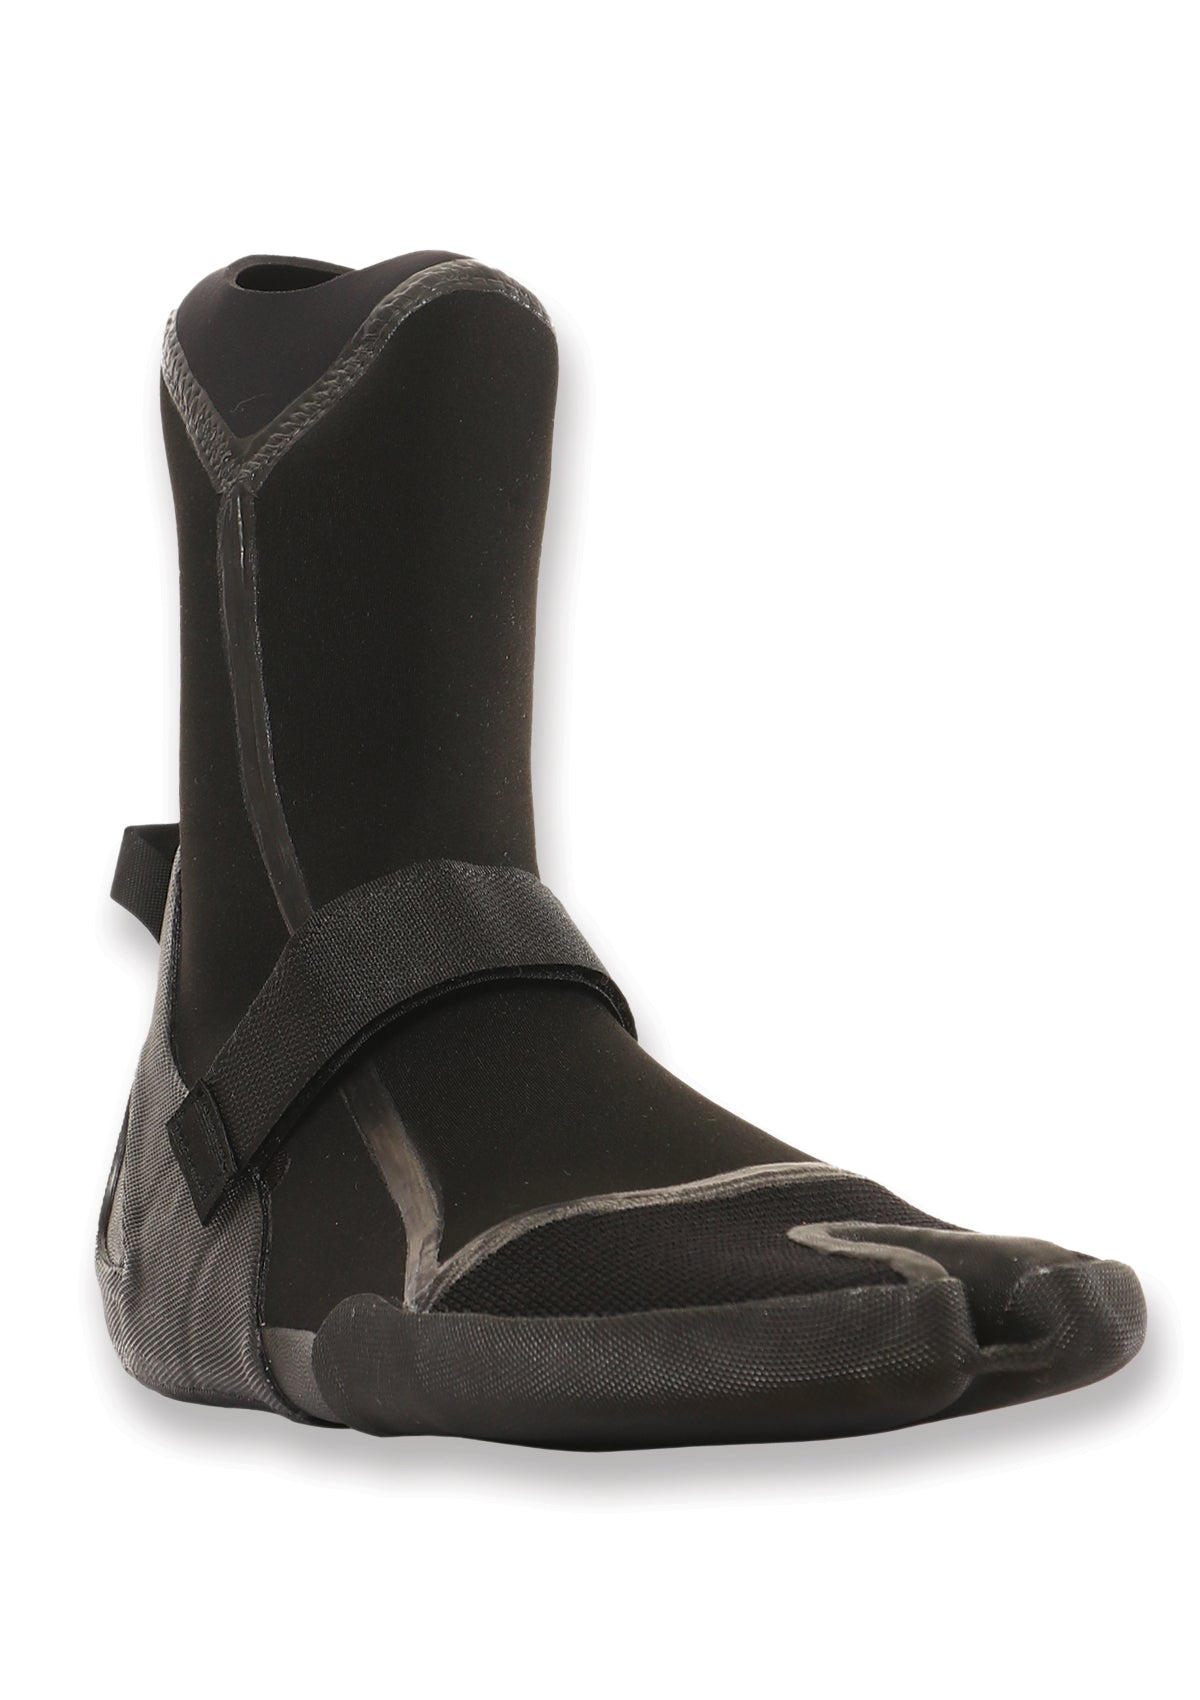 2mm Liquid Taped Thermal Wetsuit Boot